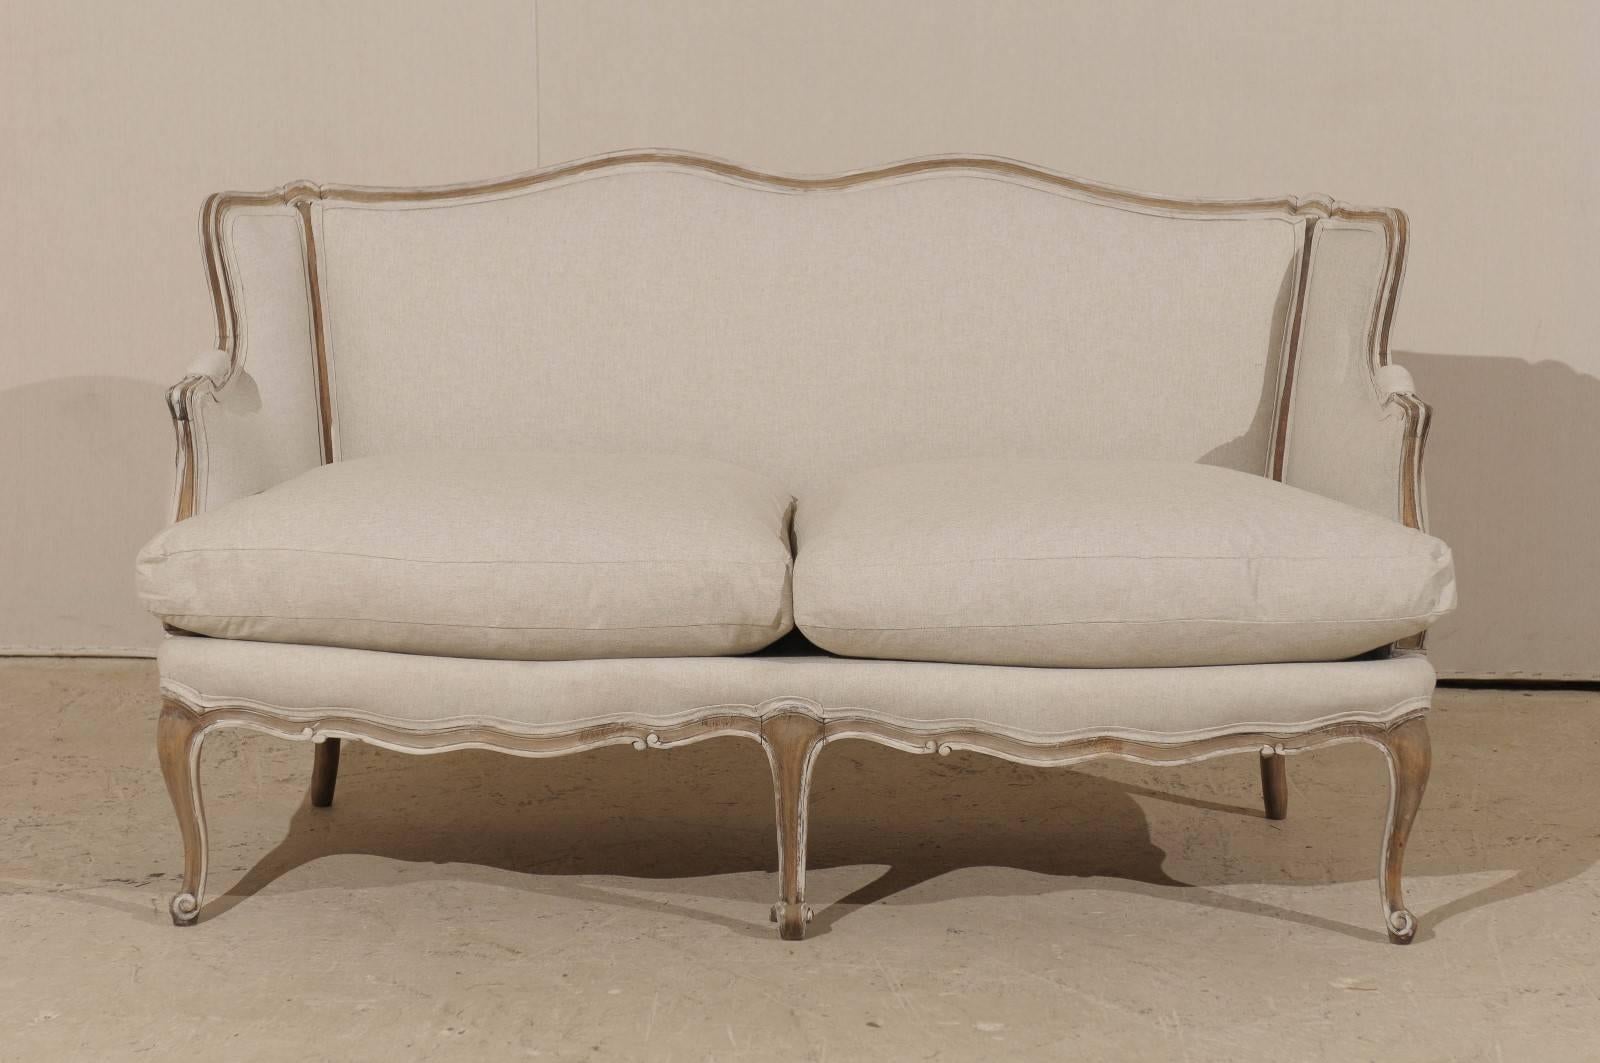 A French Louis XV style painted wood sofa from the early 20th century. This French two-seat sofa features a scalloped skirt and cabriole legs resting on scrolled feet. The sofa's nicely curved wood frame with scrolled and partially upholstered arms